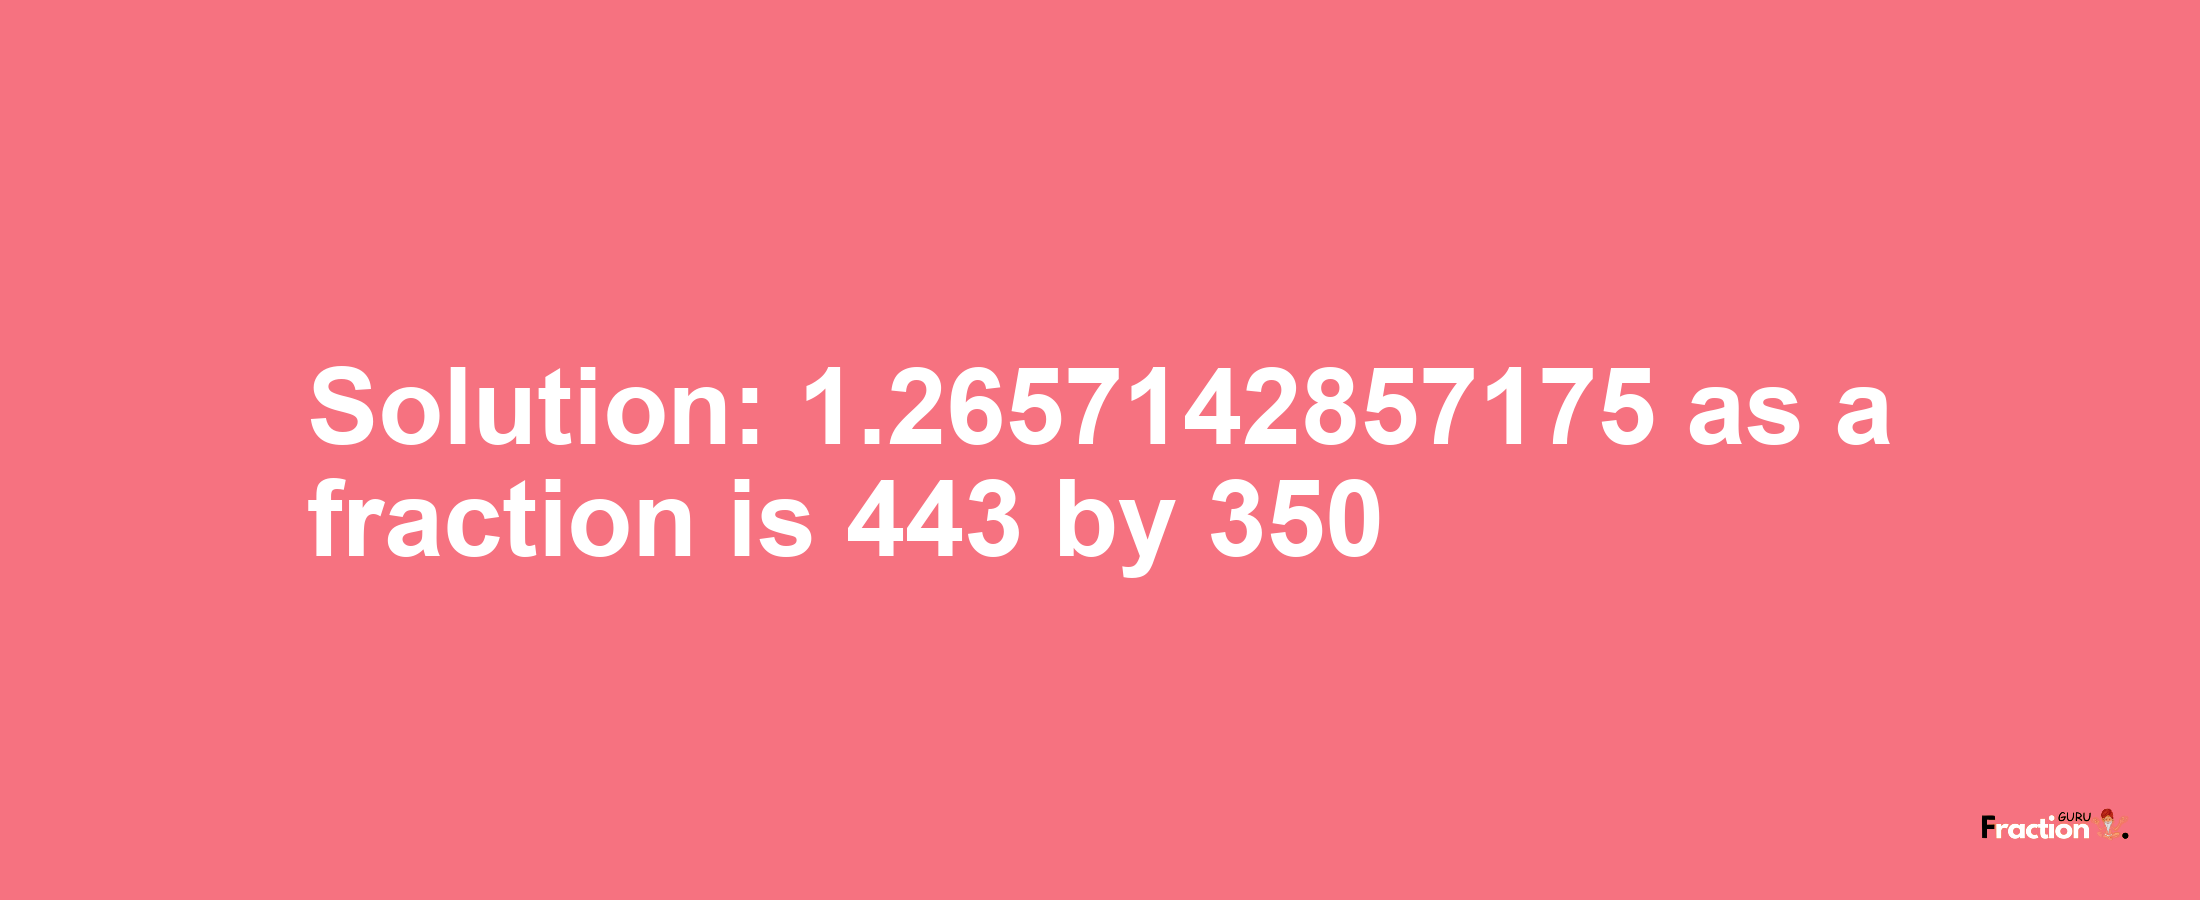 Solution:1.2657142857175 as a fraction is 443/350